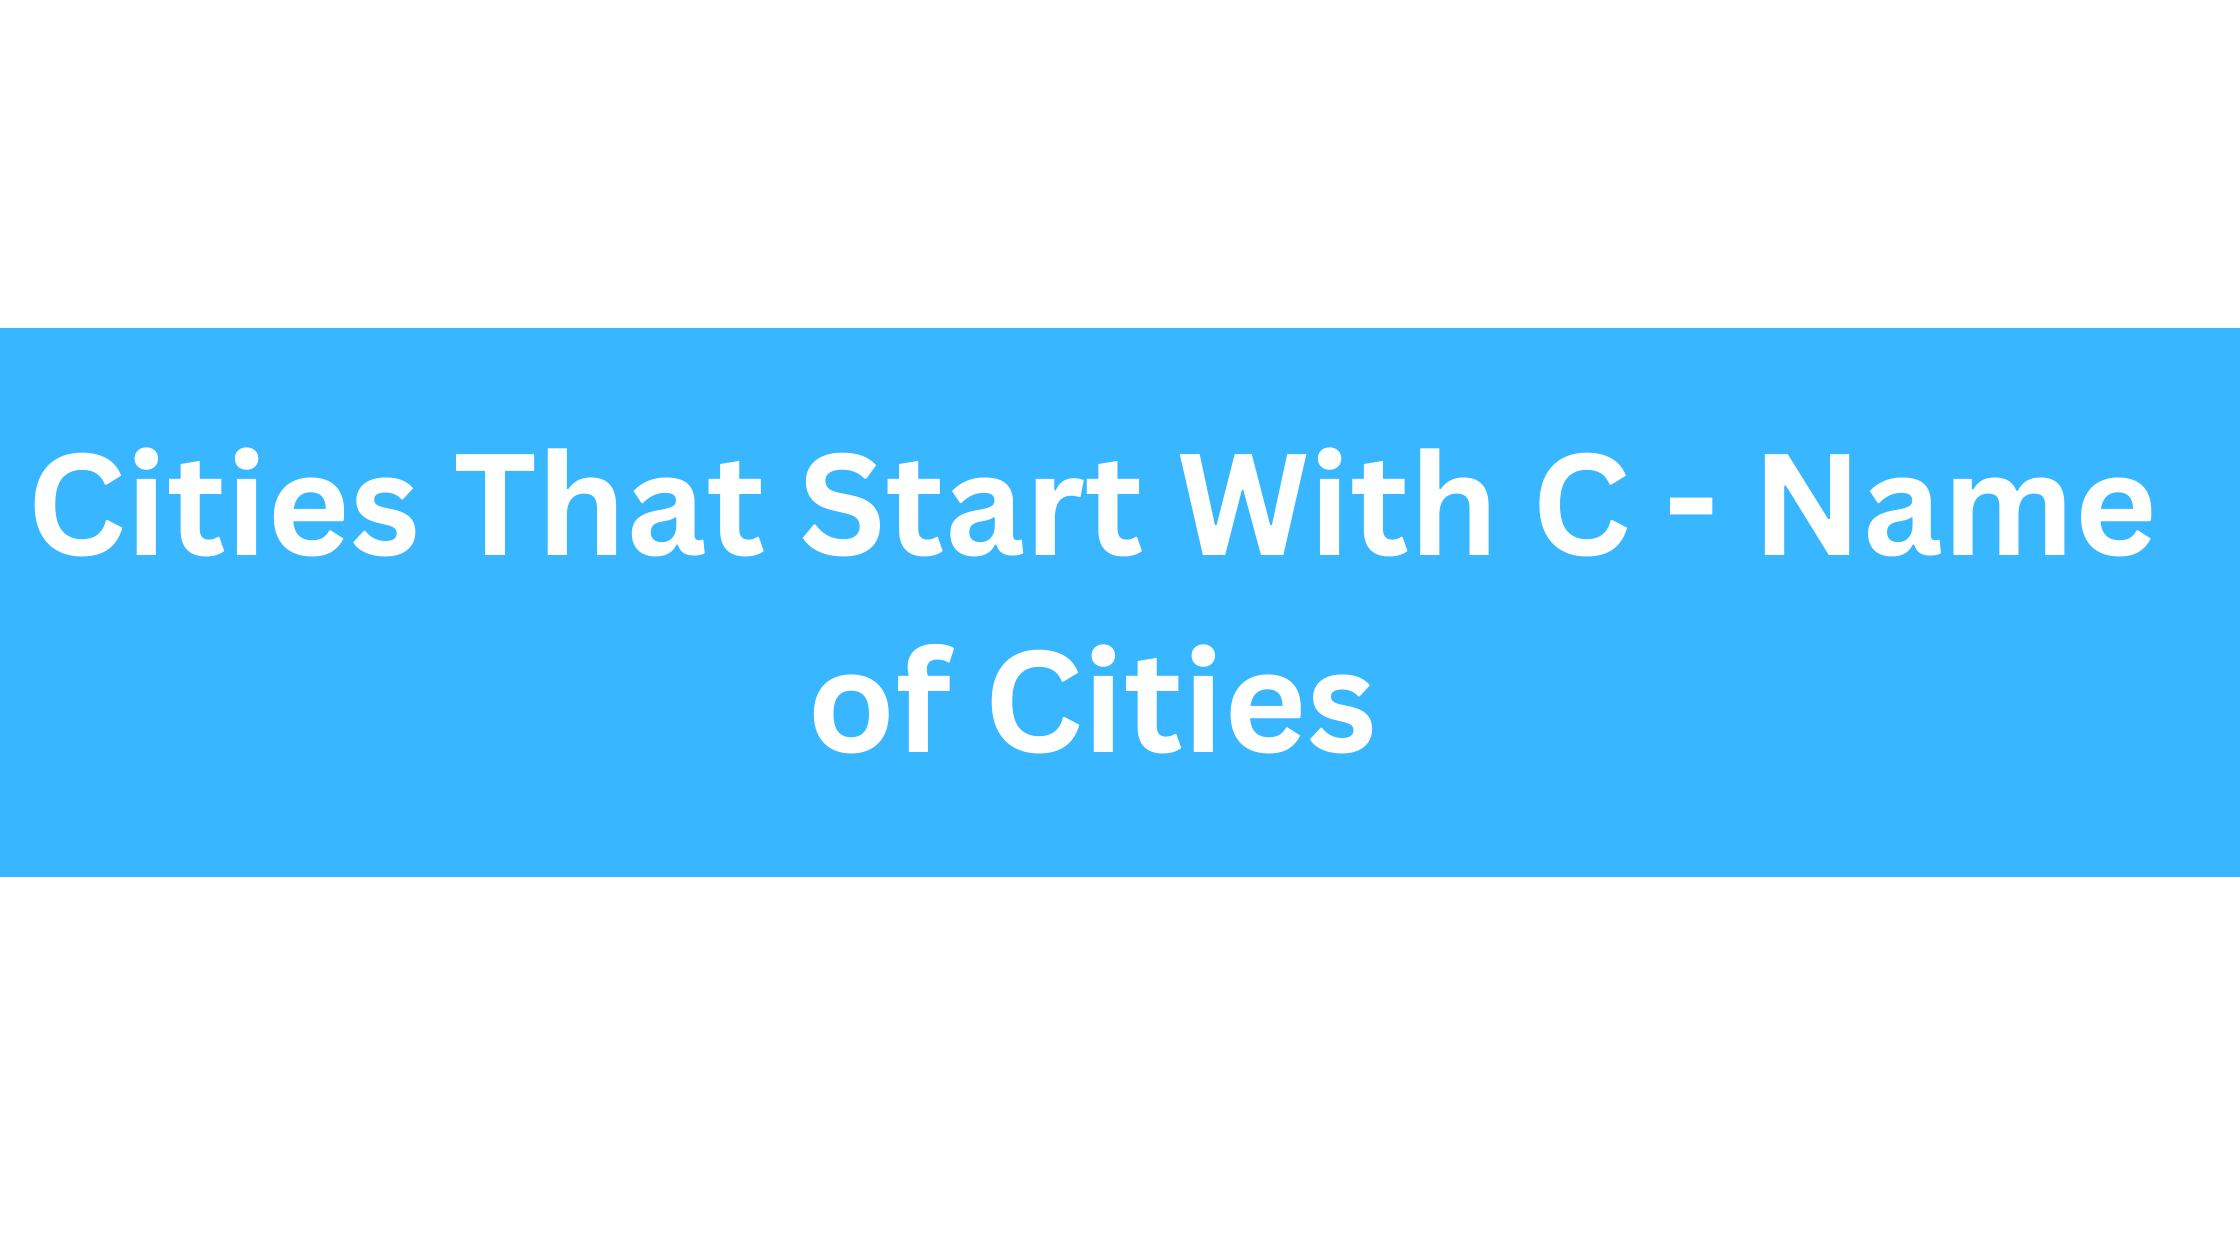 Cities That Start With C